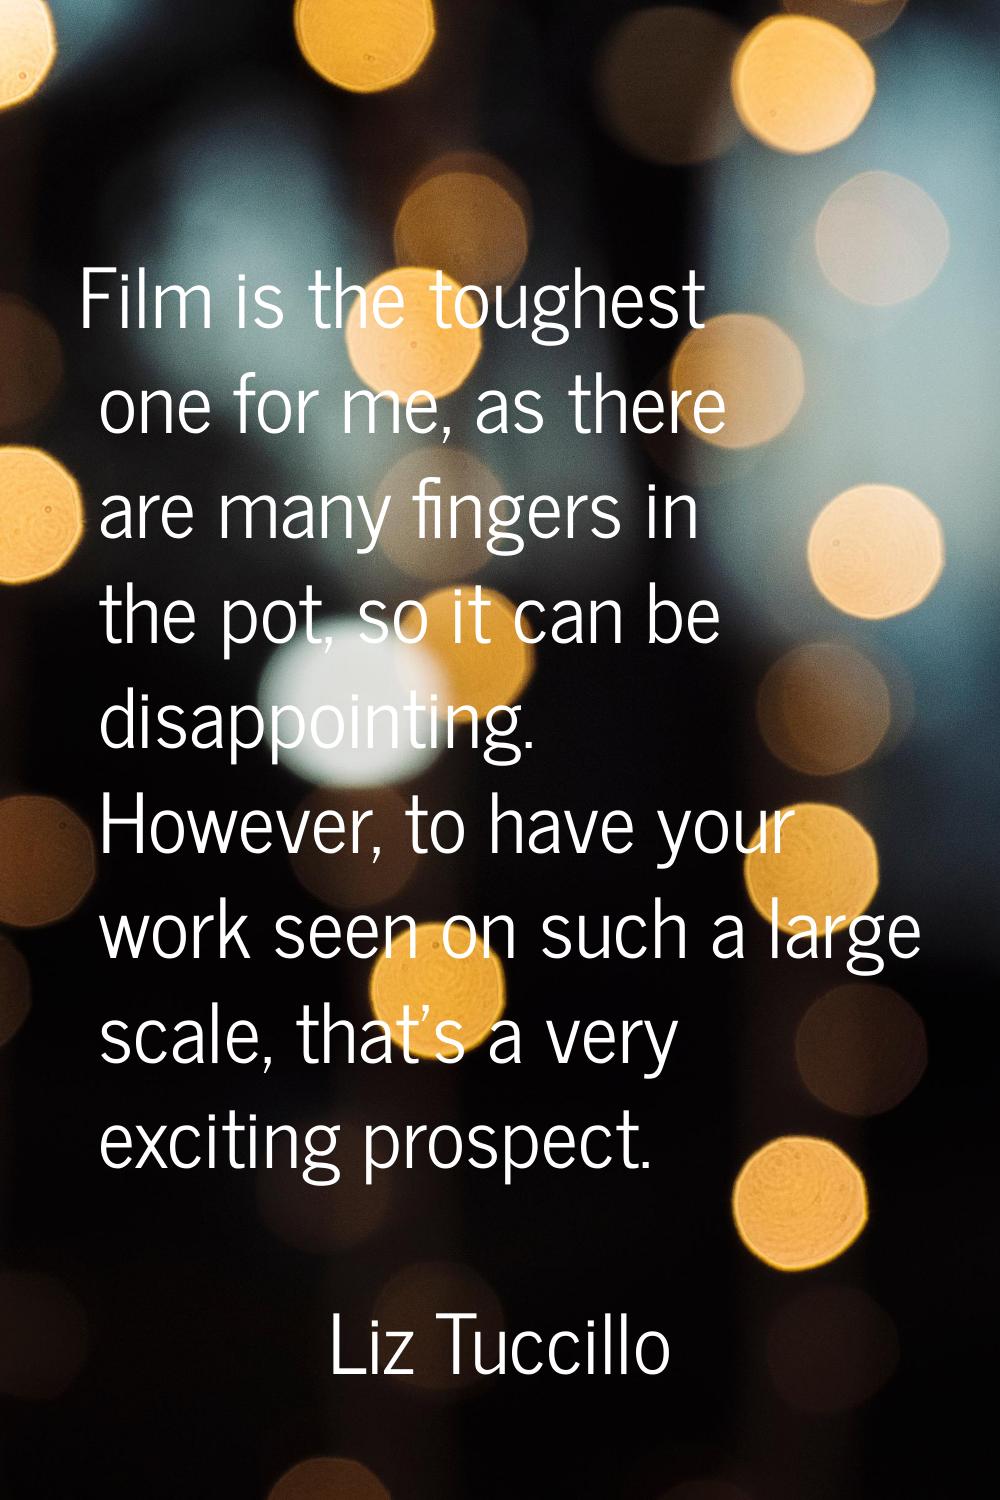 Film is the toughest one for me, as there are many fingers in the pot, so it can be disappointing. 